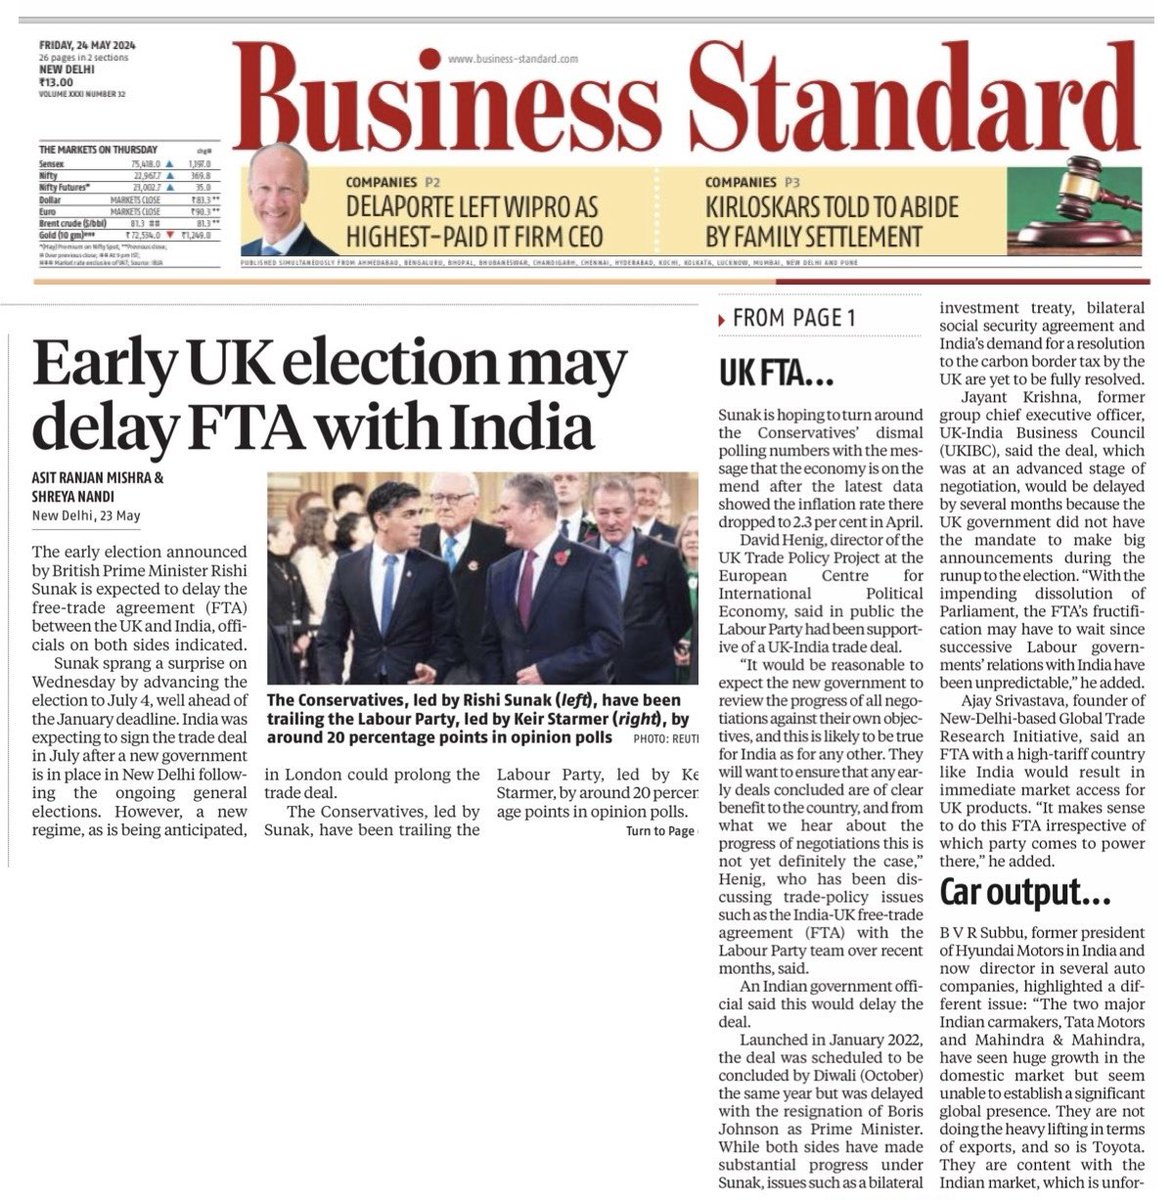 May go through my views in Business Standard @bsindia on @RishiSunak’s announcement of an early election in the UK and its effect on Free Trade Agreement (FTA) which was at an advanced stage of negotiation and would be delayed by several months because the UK government does not